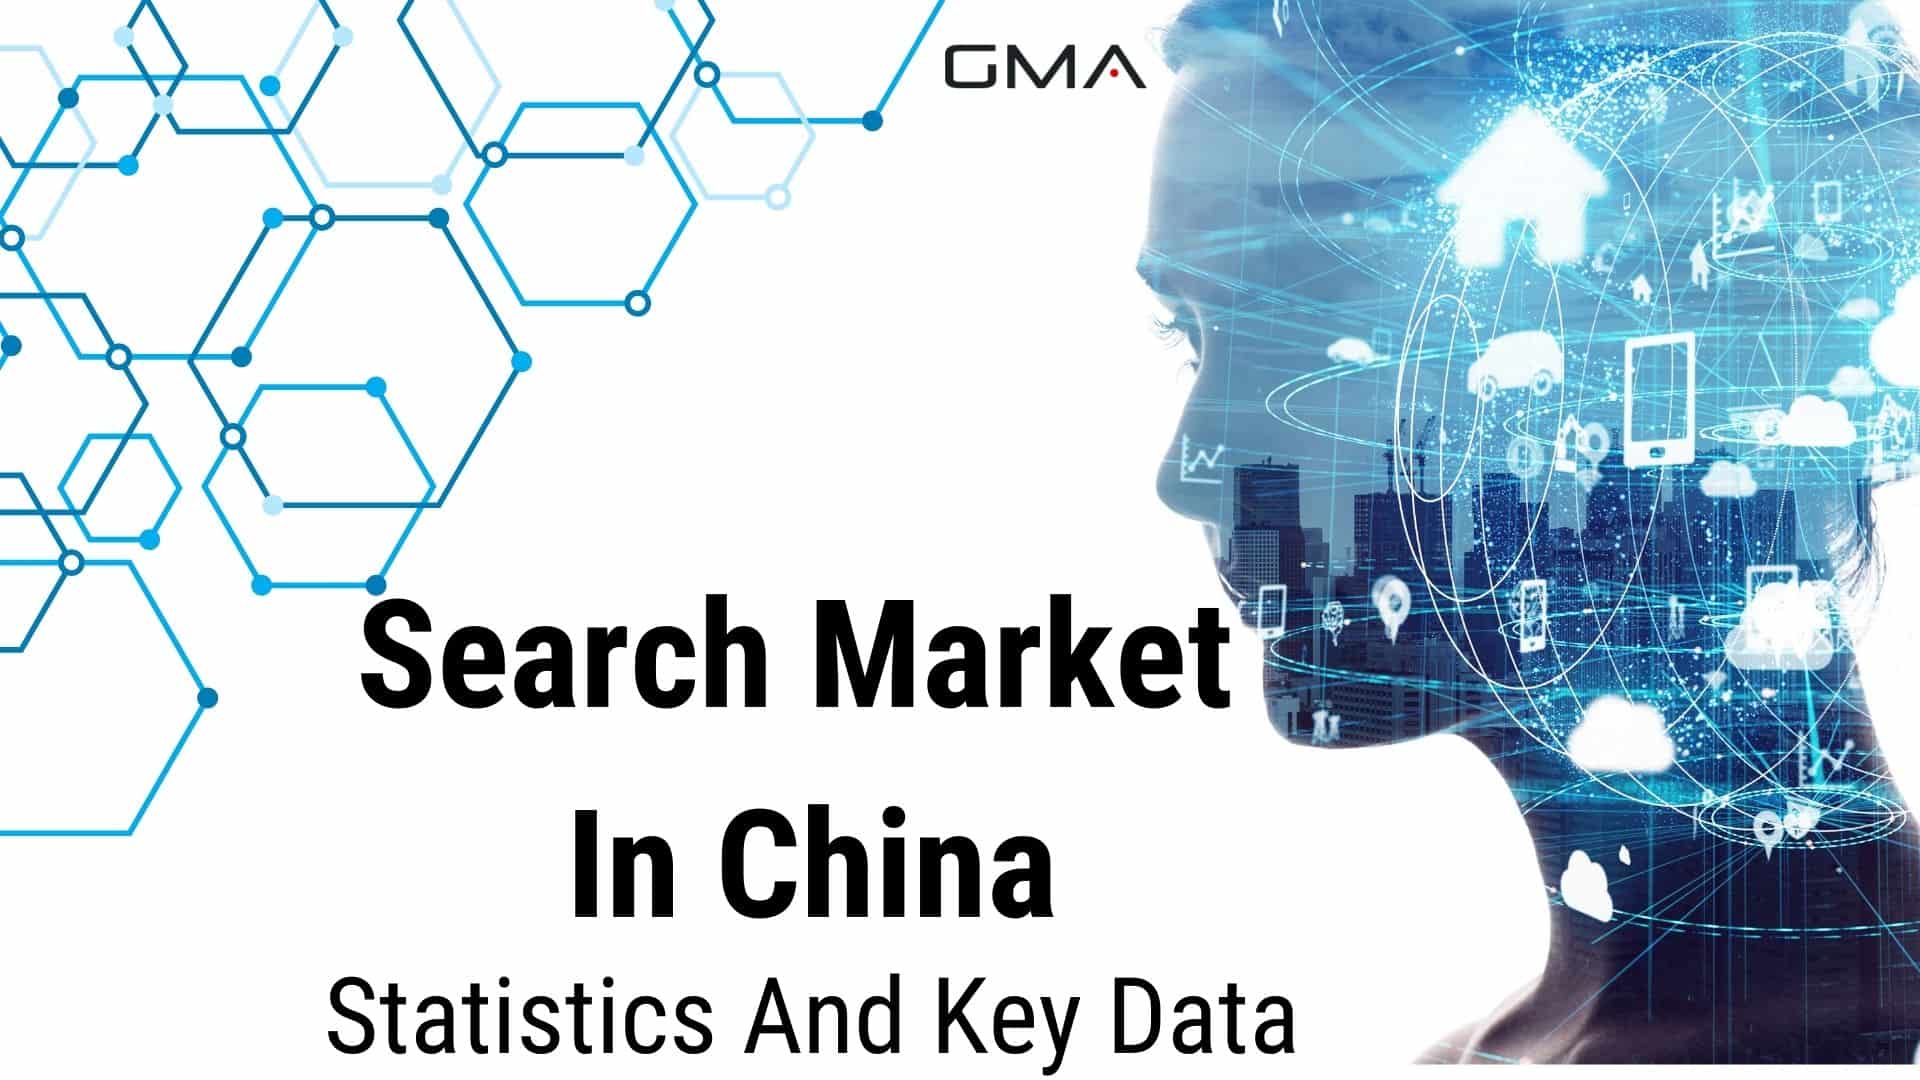 Search Market In China: Statistics And Key Data